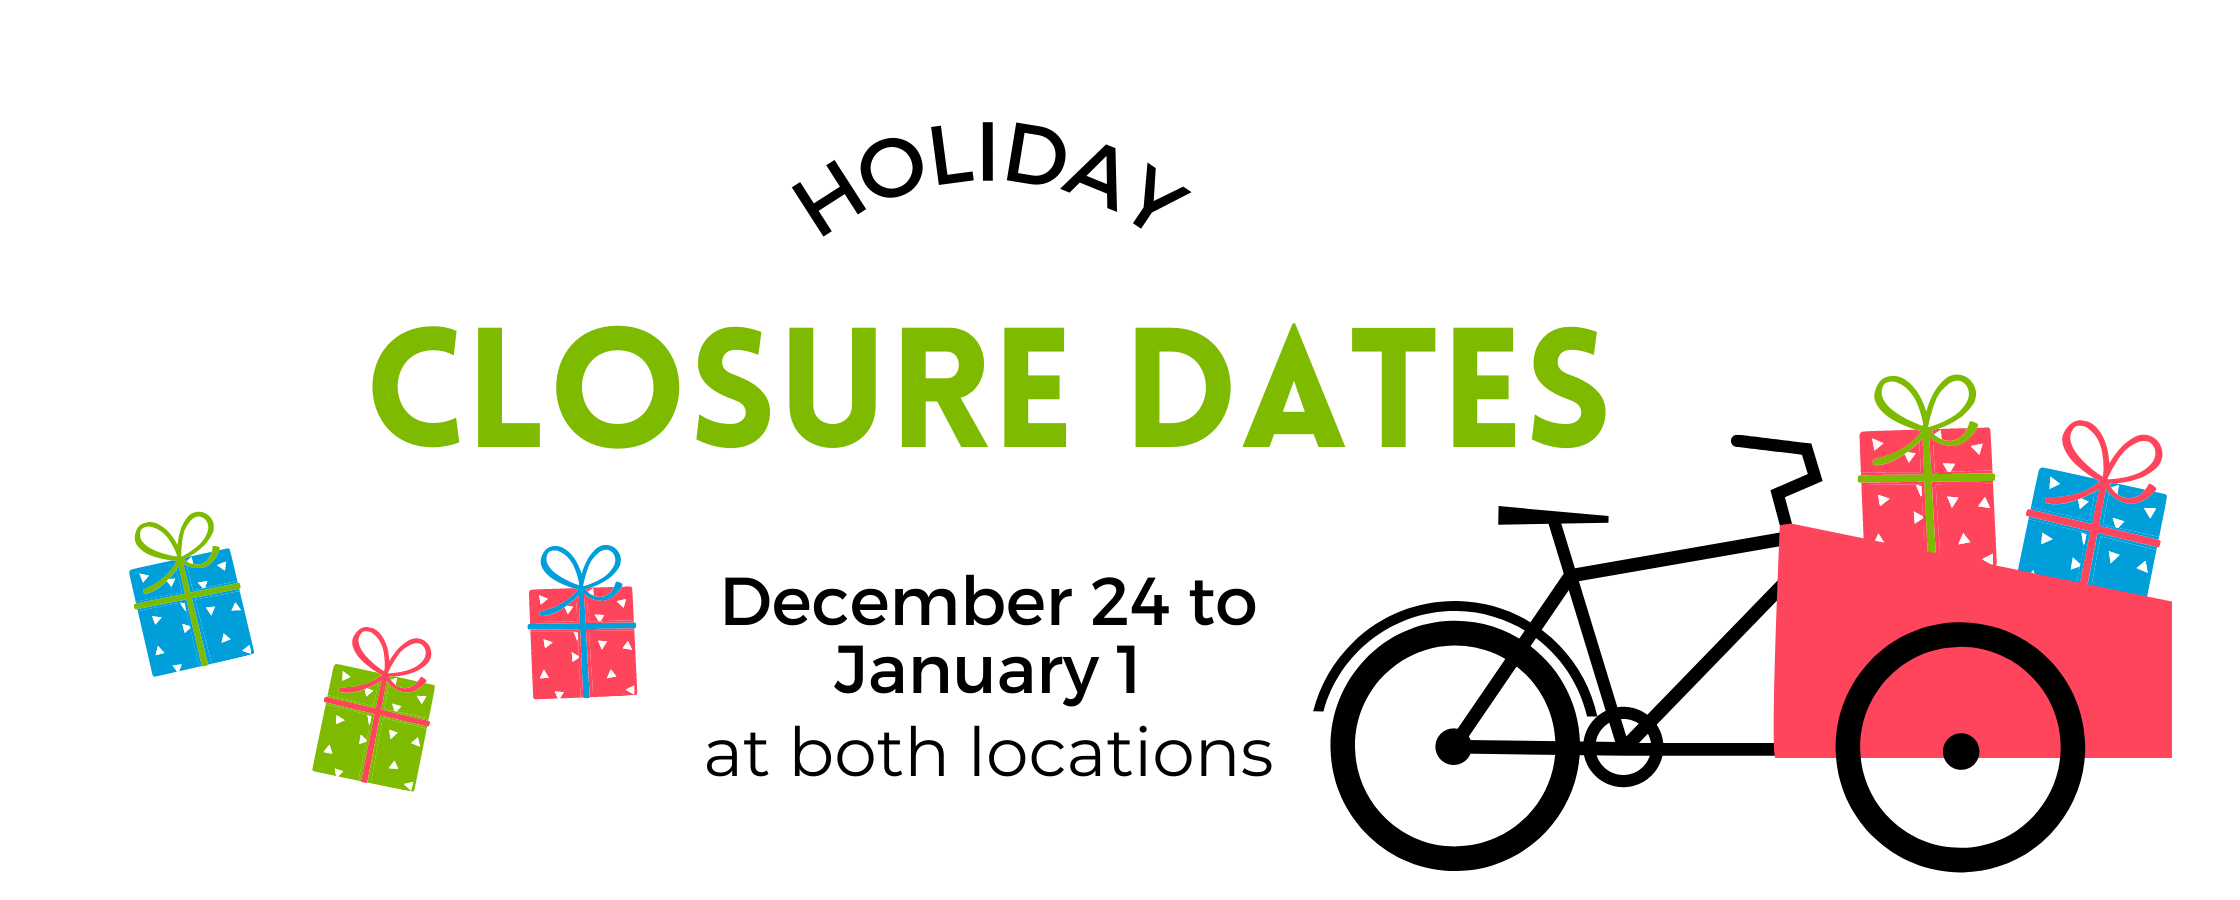 Holiday Closure Dates: December 24 to January 1 at both locations